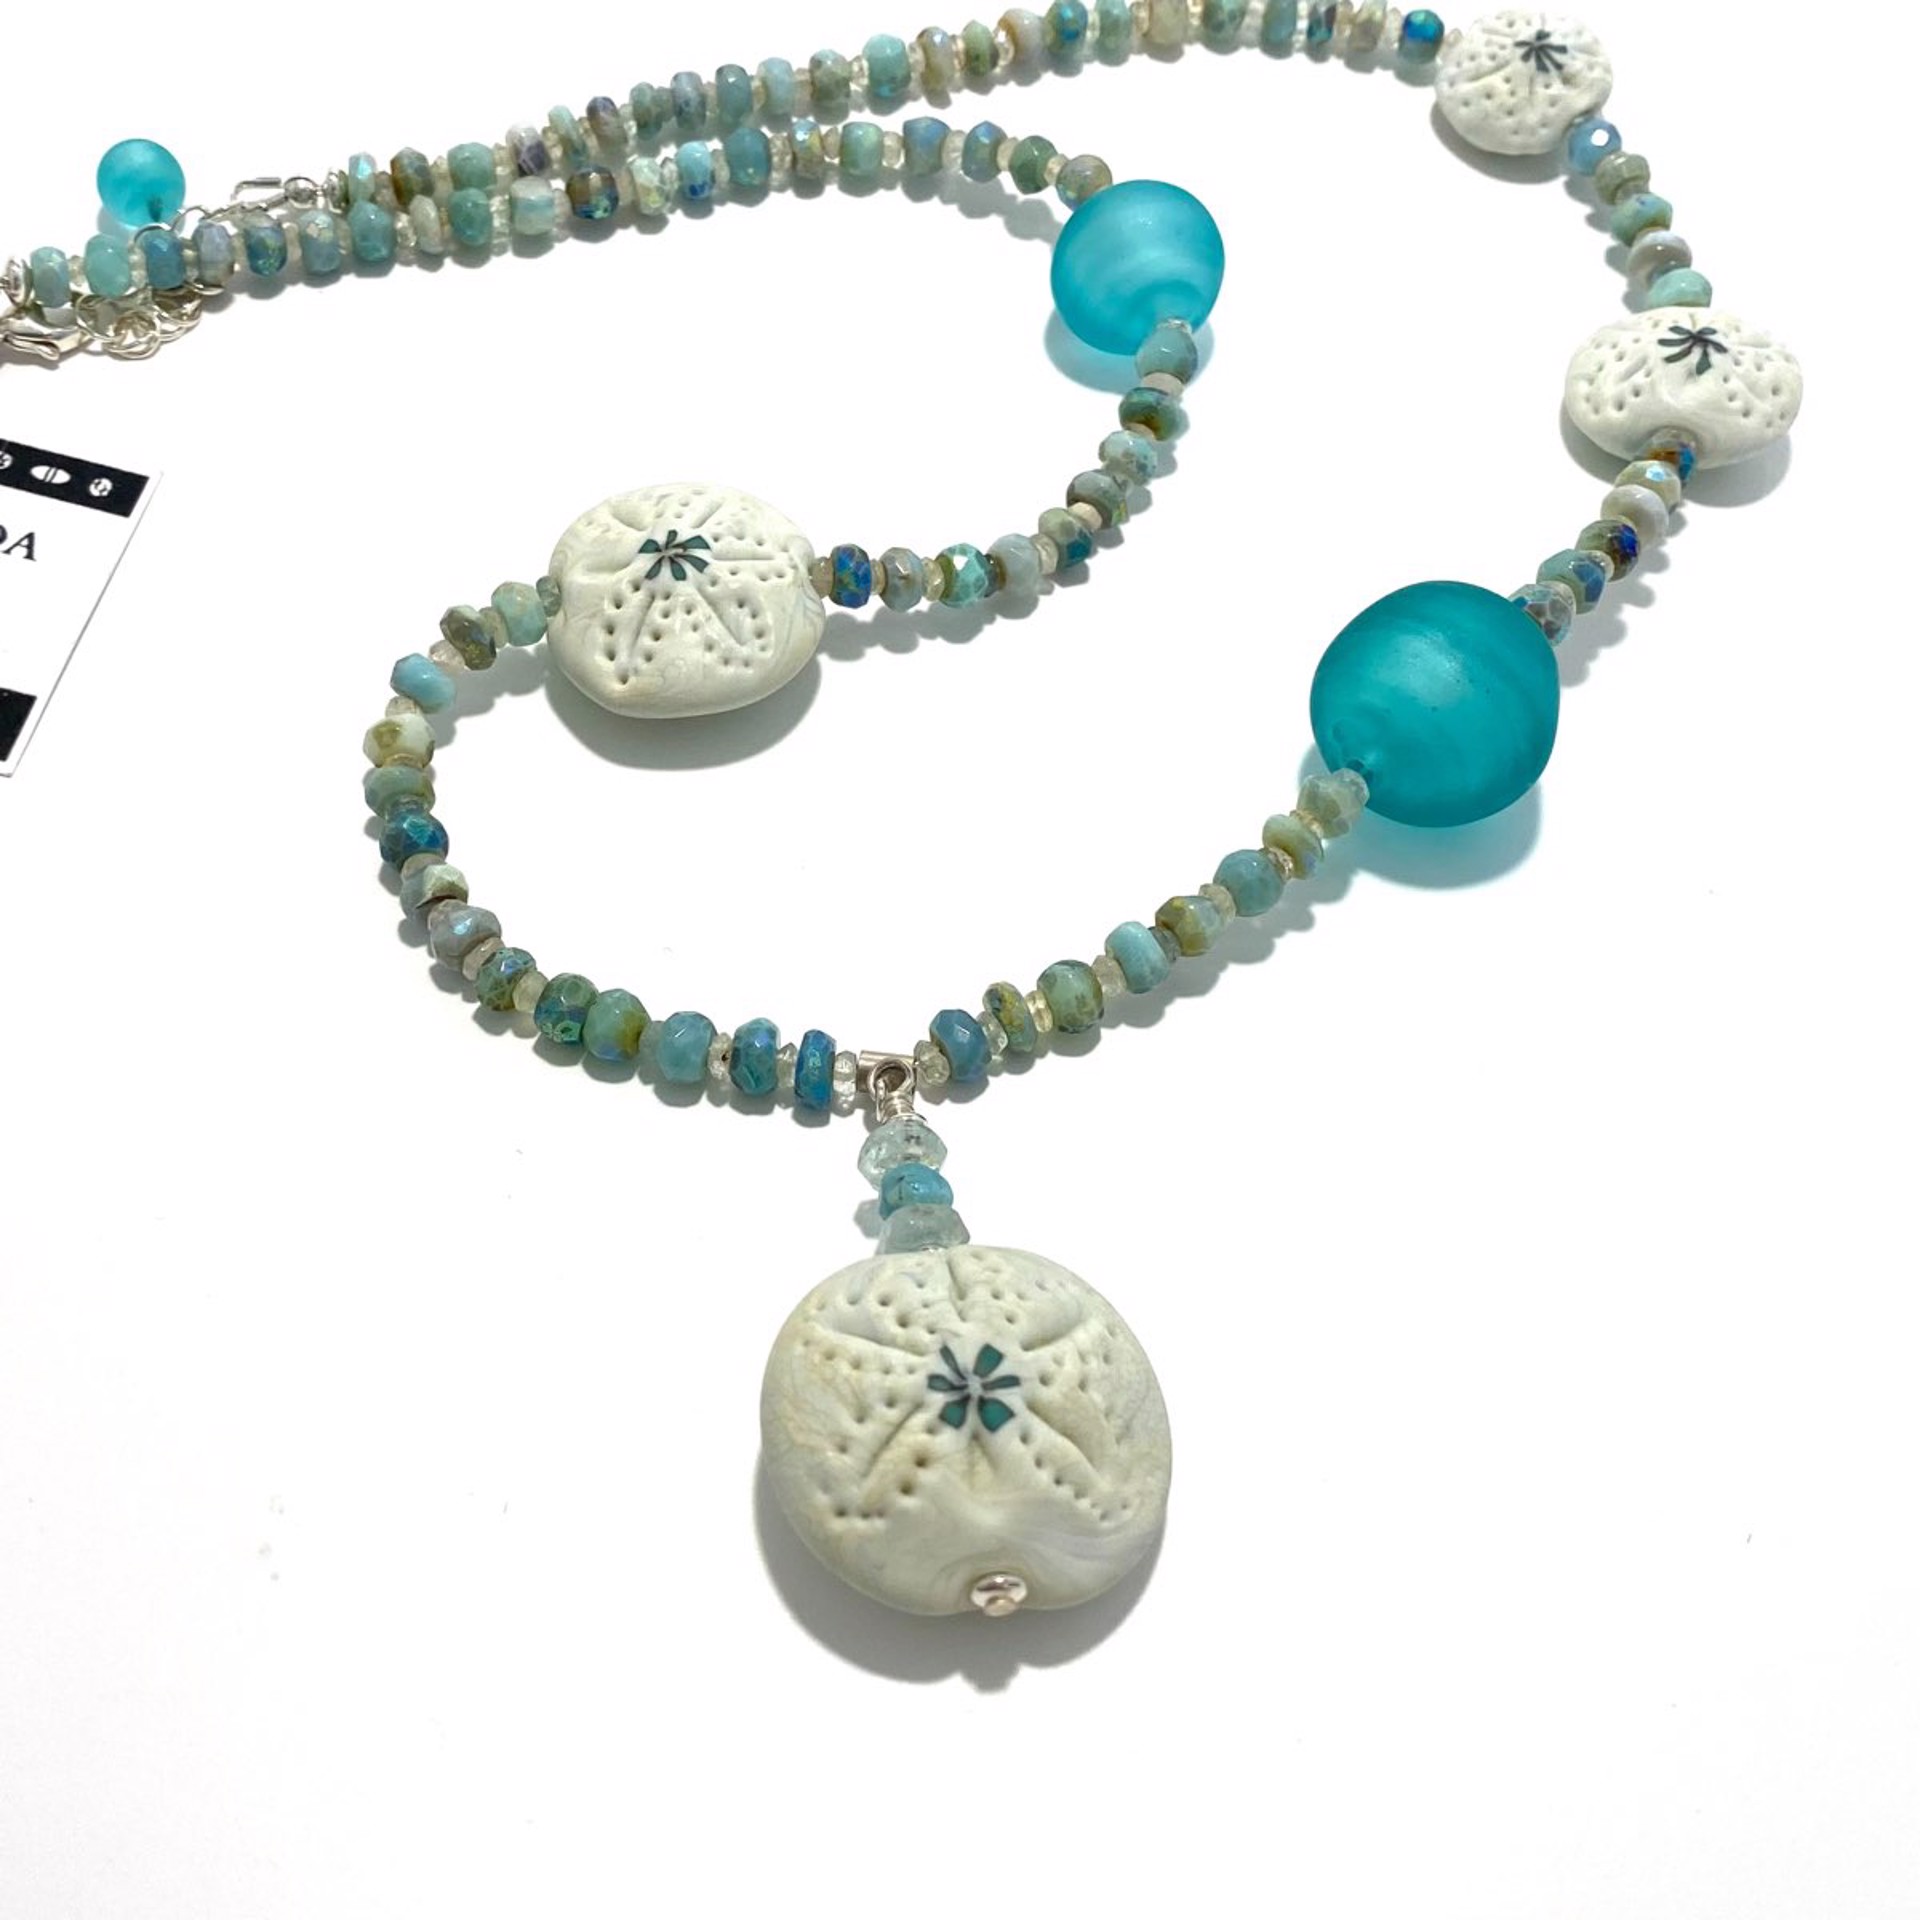 Ivory Sand Dollar Pendant on Ivory and Teal Glass Bead and Gemstone Necklace LS22-467N by Linda Sacra